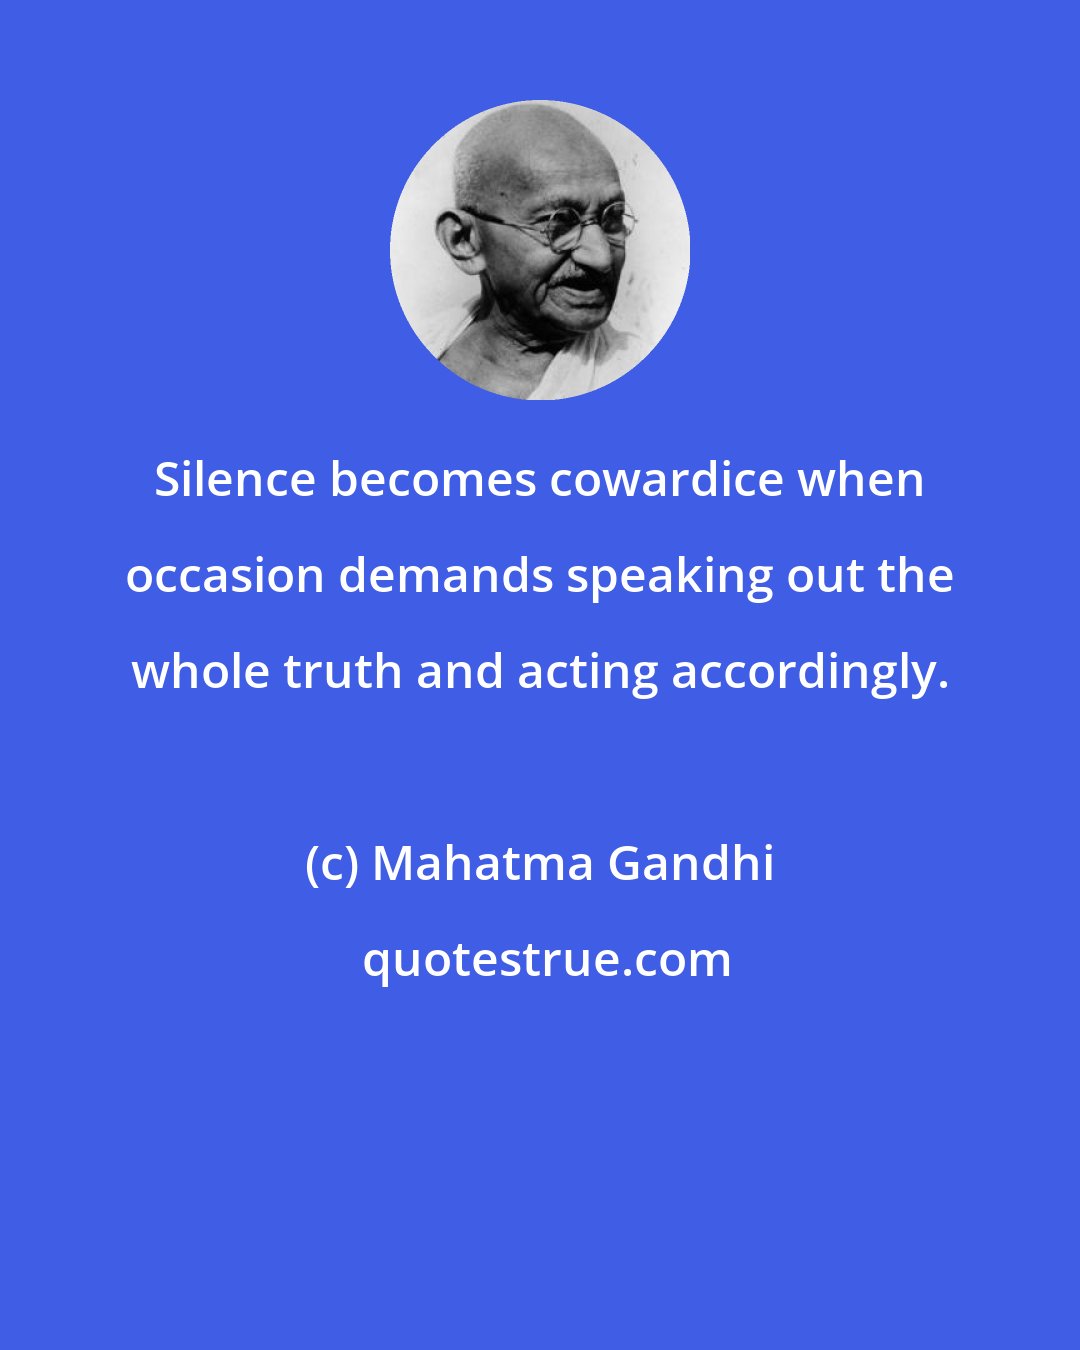 Mahatma Gandhi: Silence becomes cowardice when occasion demands speaking out the whole truth and acting accordingly.